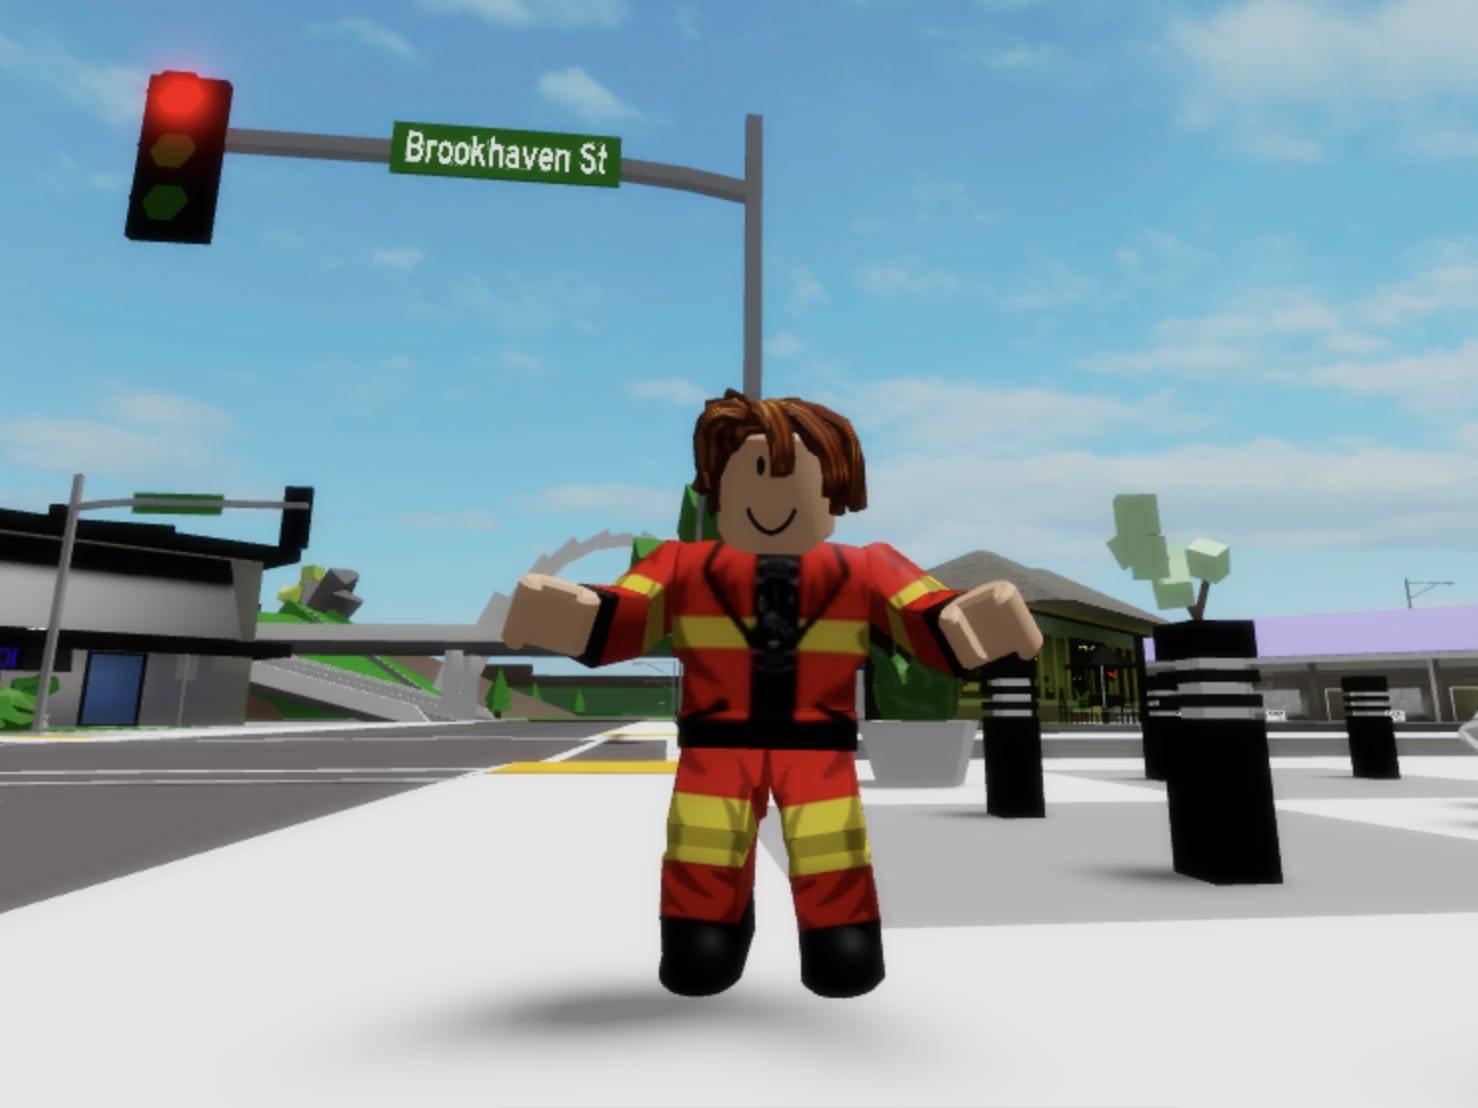 Eye-popping stats about Roblox, the wildly popular game platform